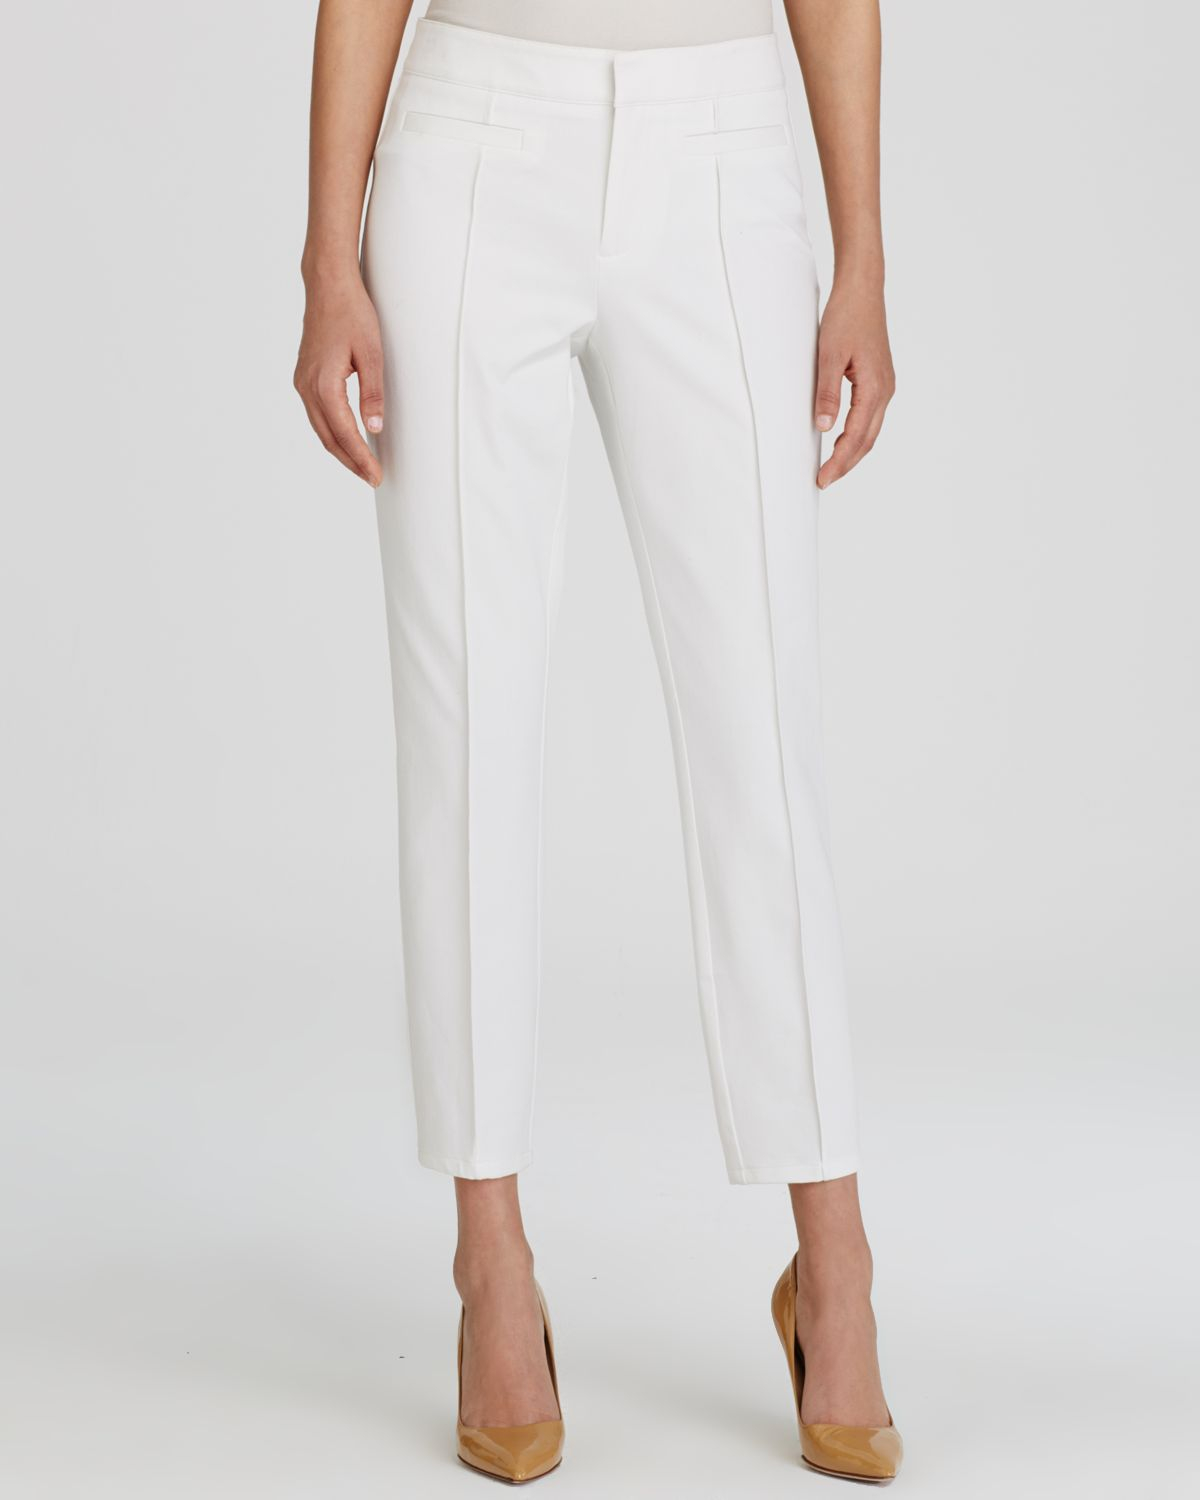 Dkny Cropped Pintuck Pants in White | Lyst